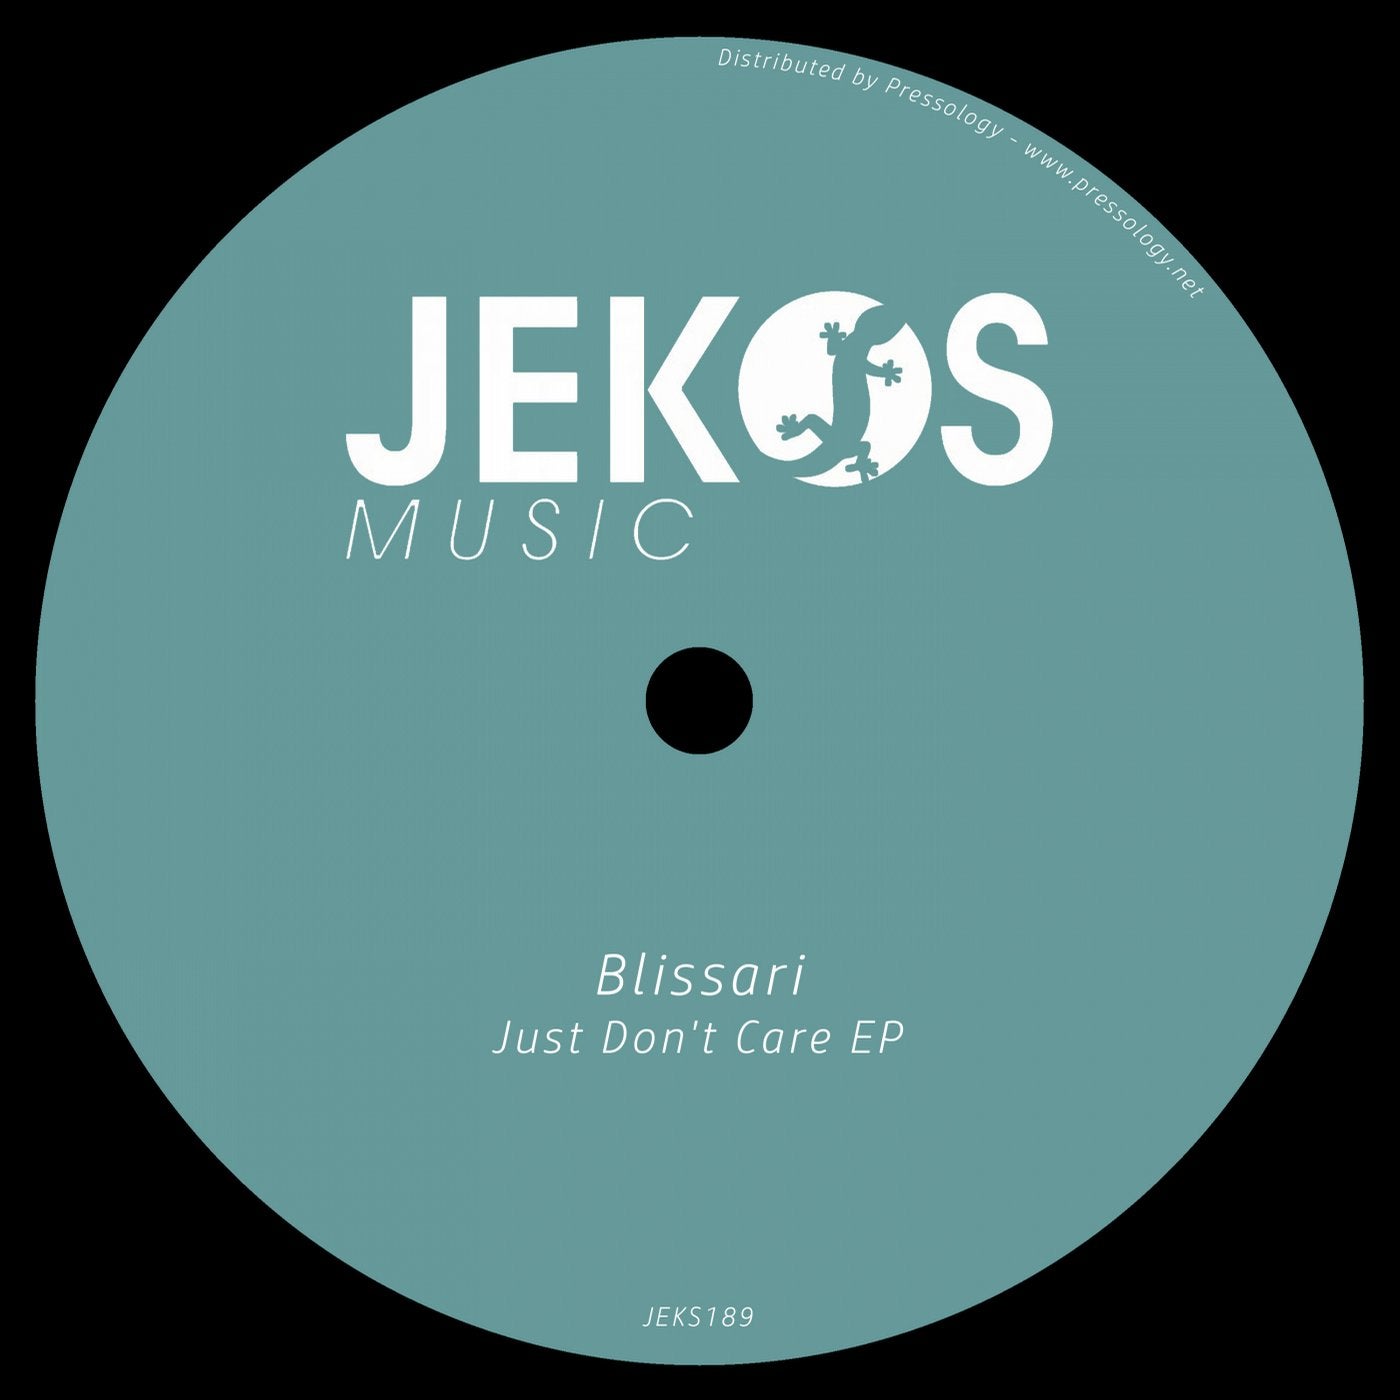 Just Don't Care EP